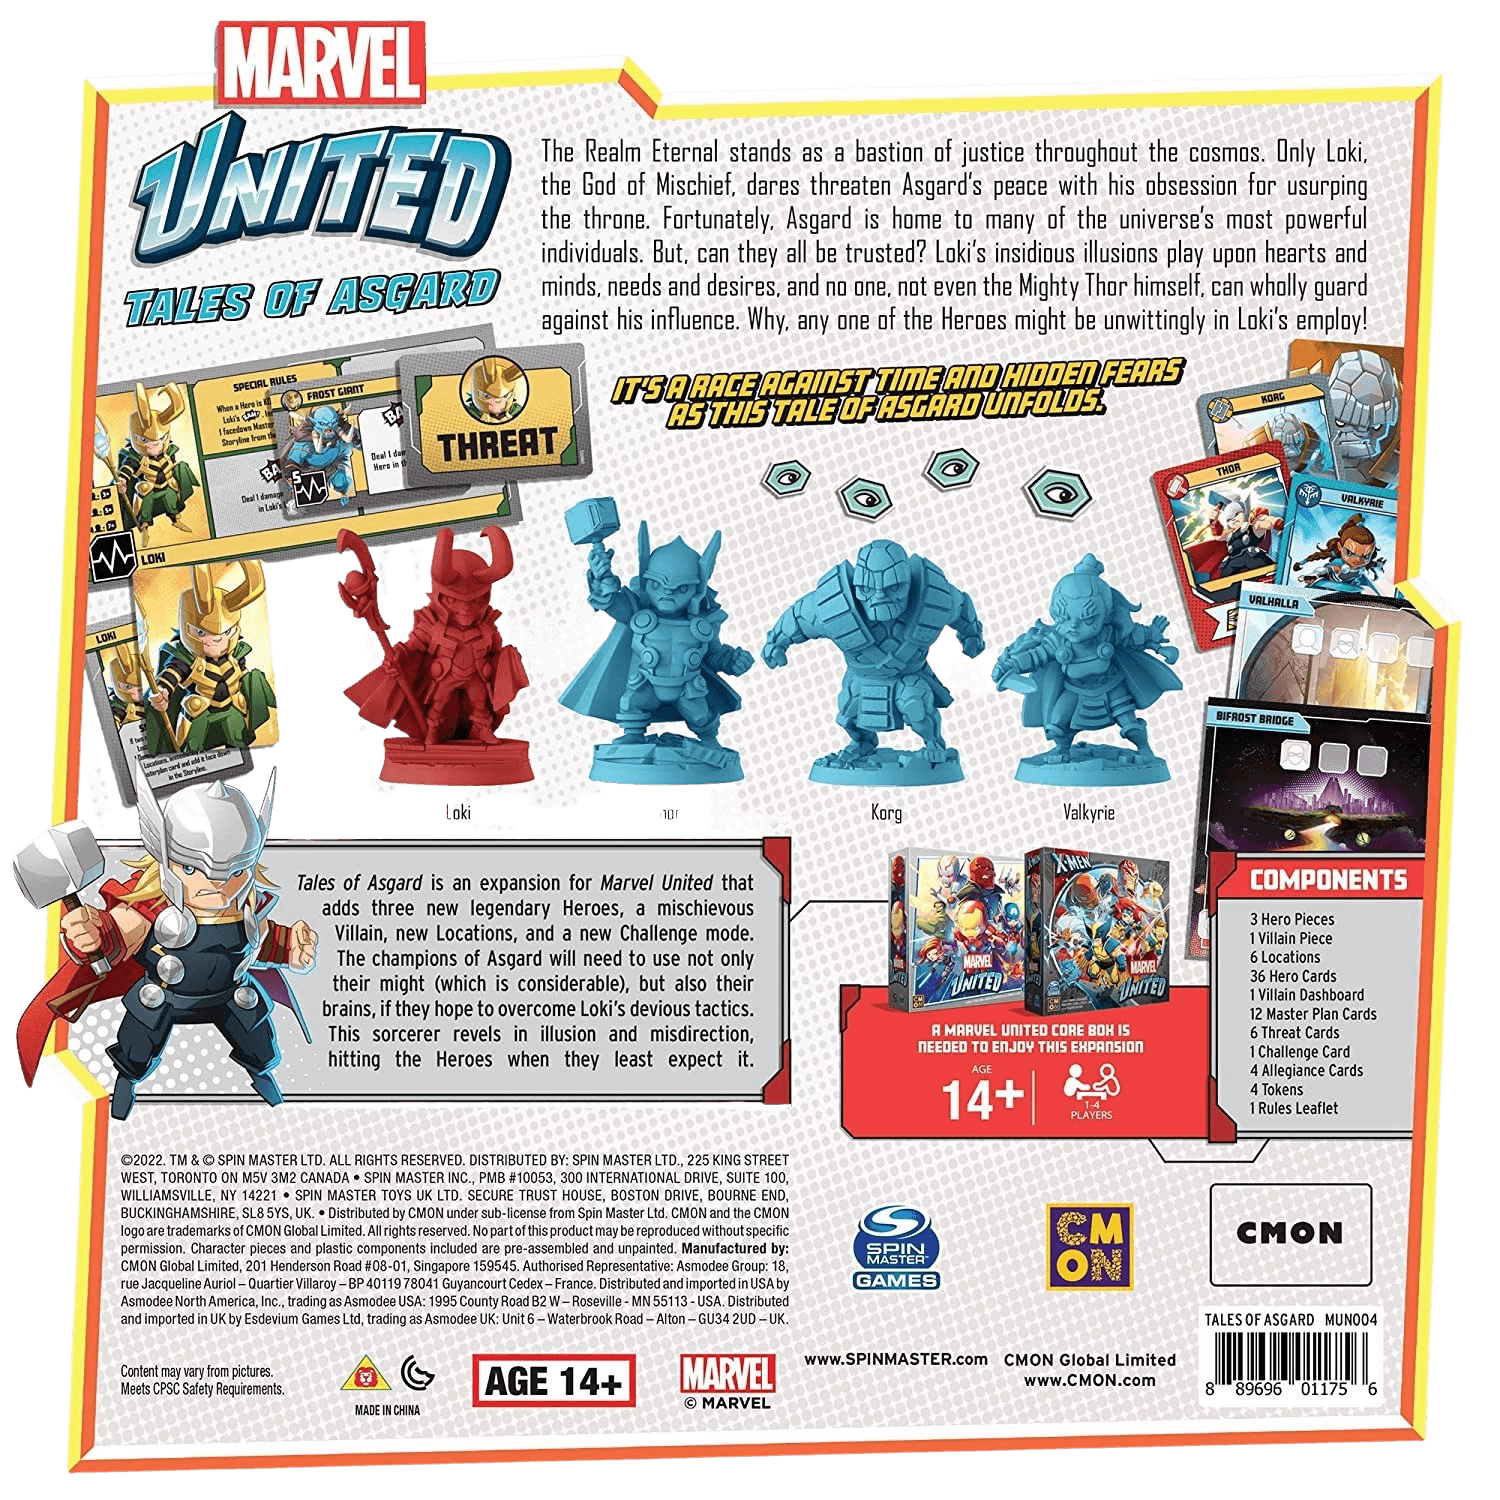 Marvel United - Tales of Asgard Expansion - The Card Vault